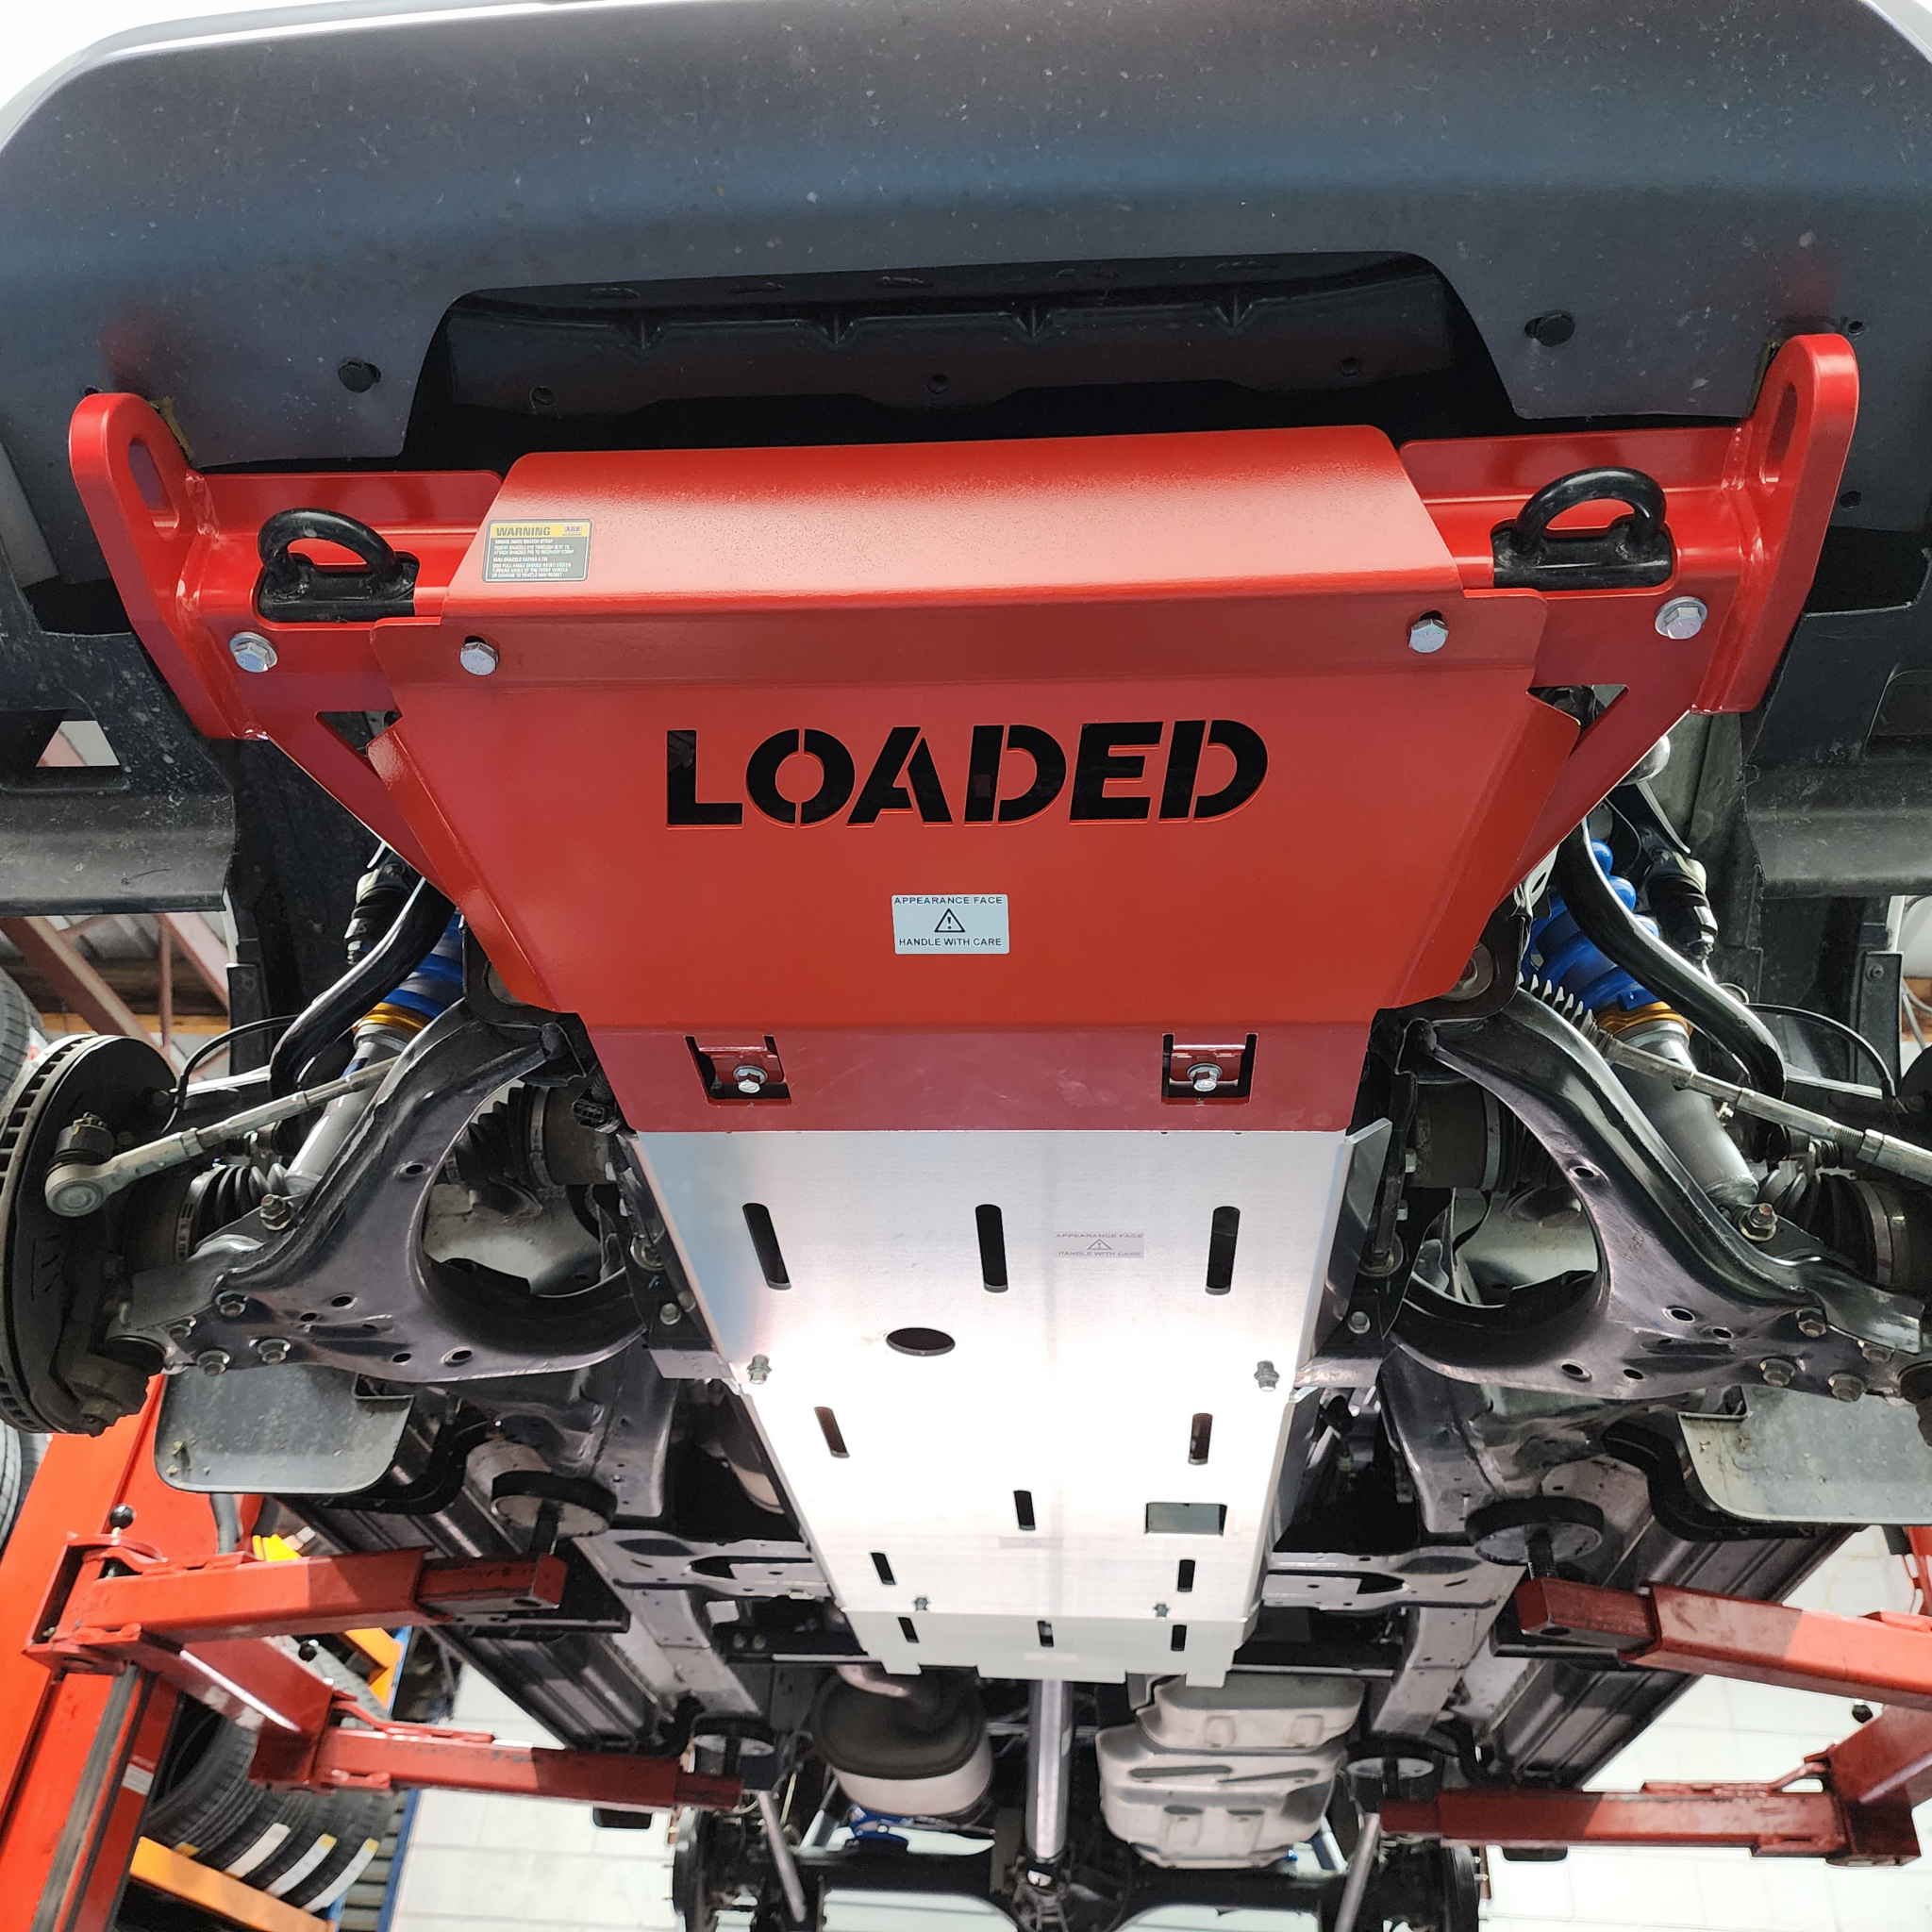 Loaded4X4 D-MAX MU-X BT-50 Bash Plates ARB recovery point compatible-2.png__PID:85640000-8072-4b32-a9f0-b9e58a20e547